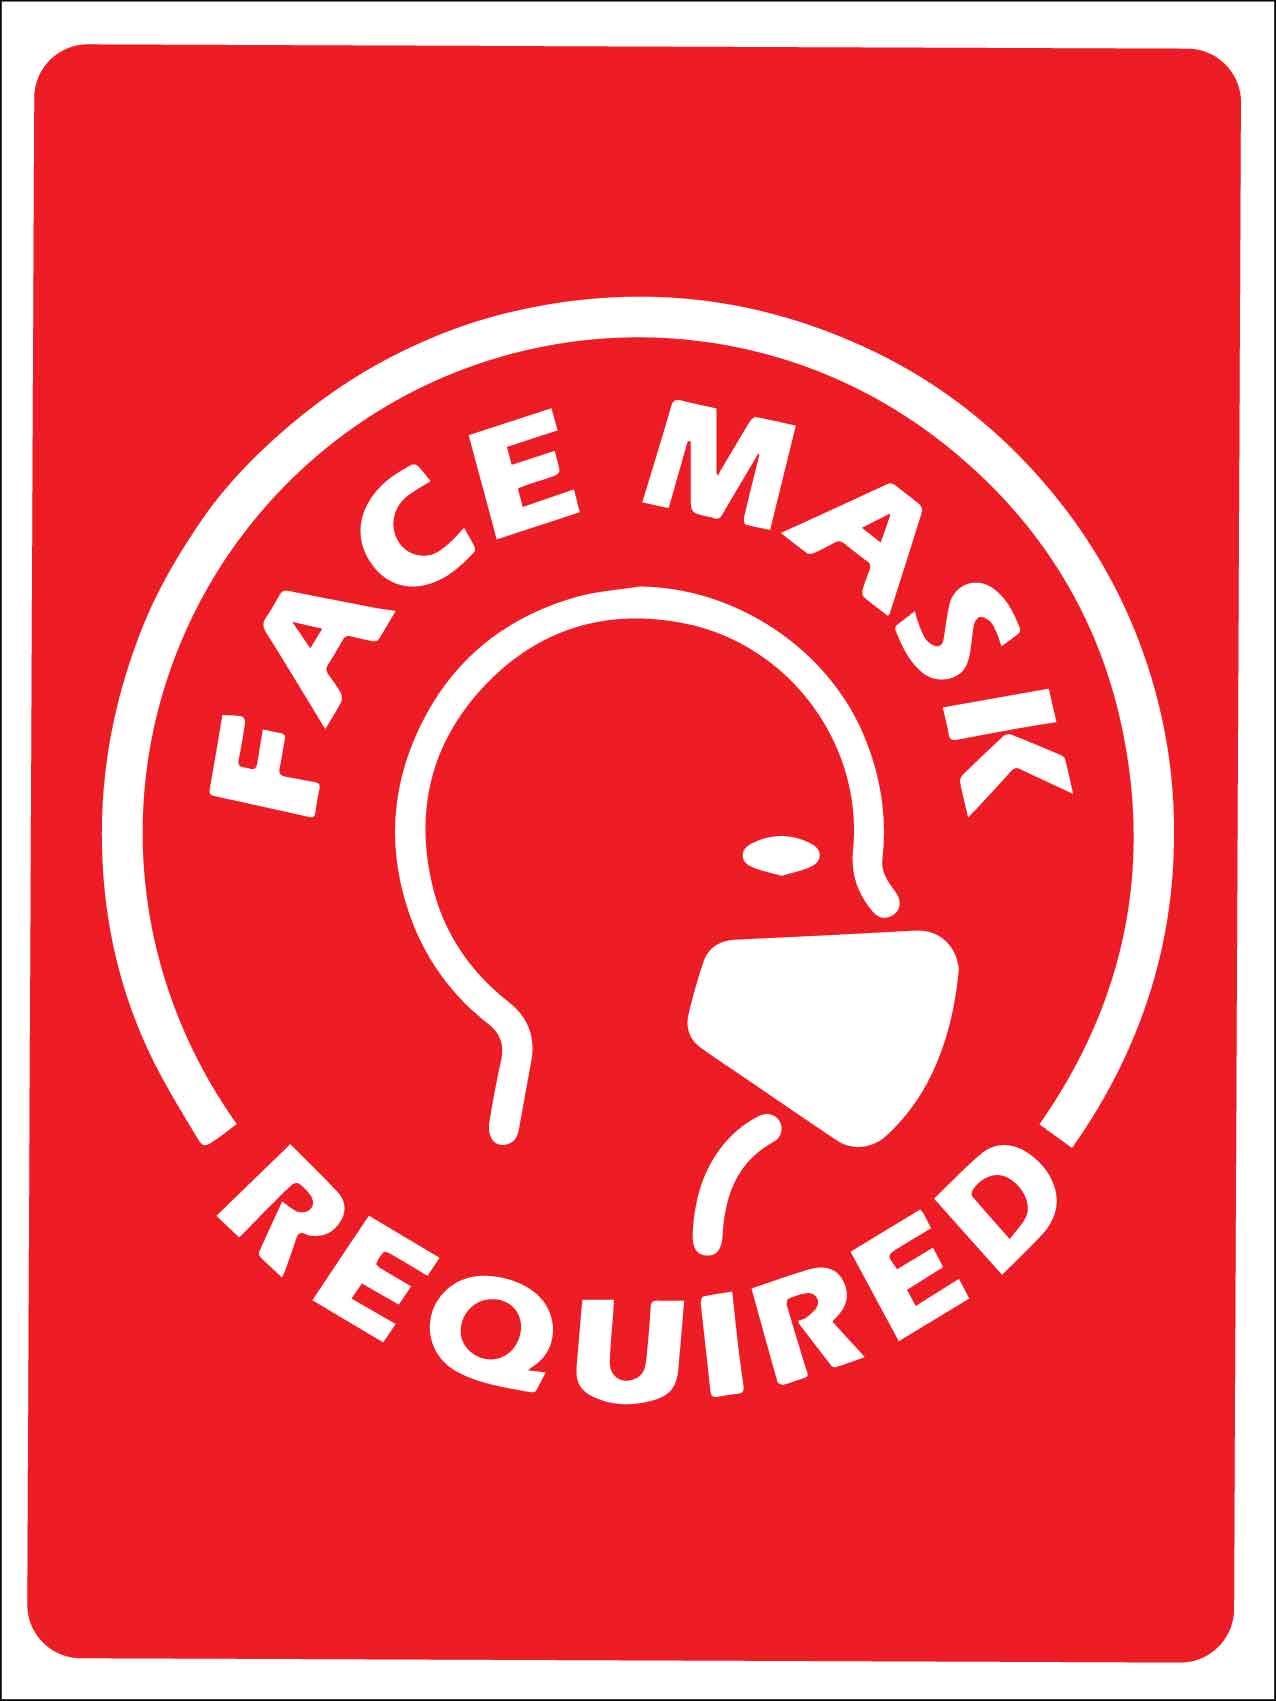 Face Mask Required Image Red Sign